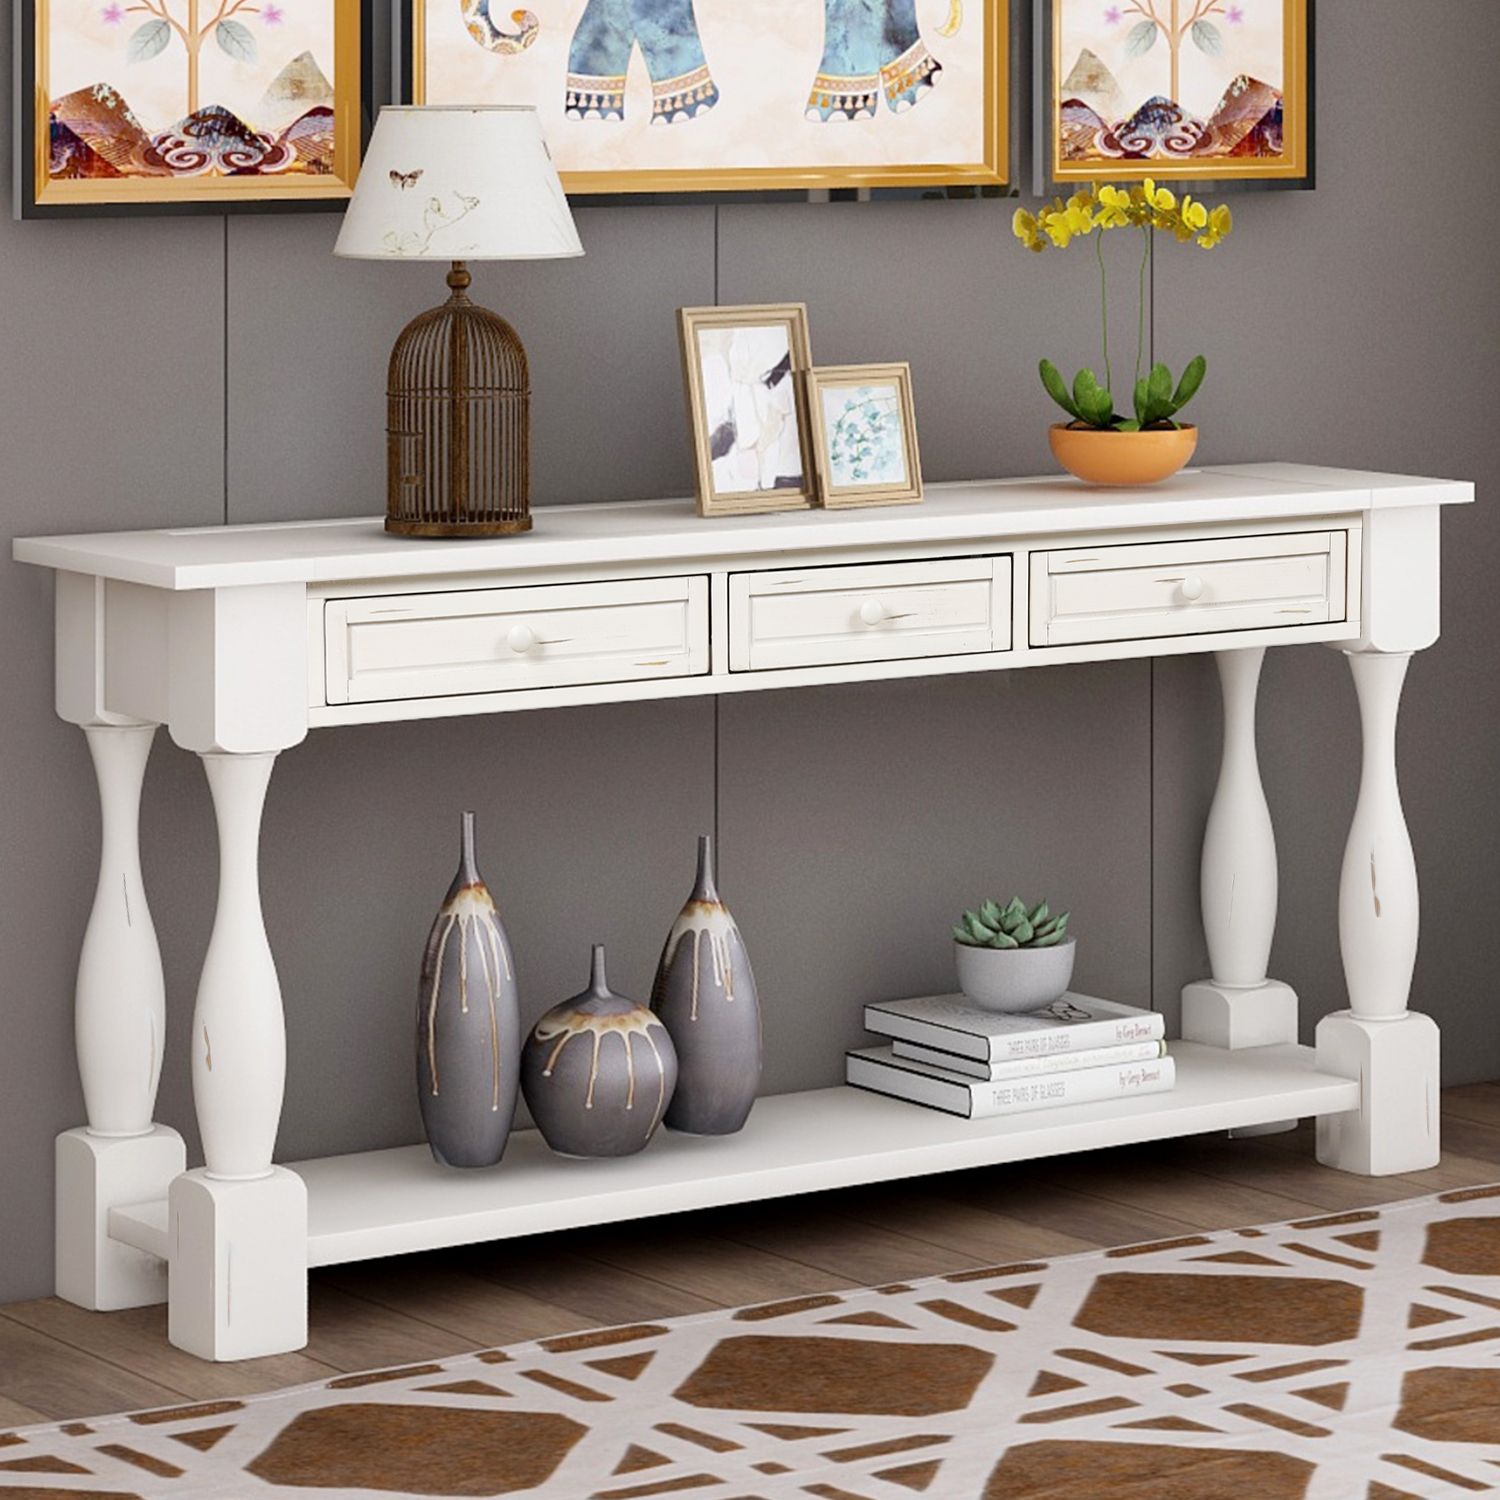 Console Table 64" Long Sofa Table Easy Assembly With In Geometric White Console Tables (View 10 of 20)